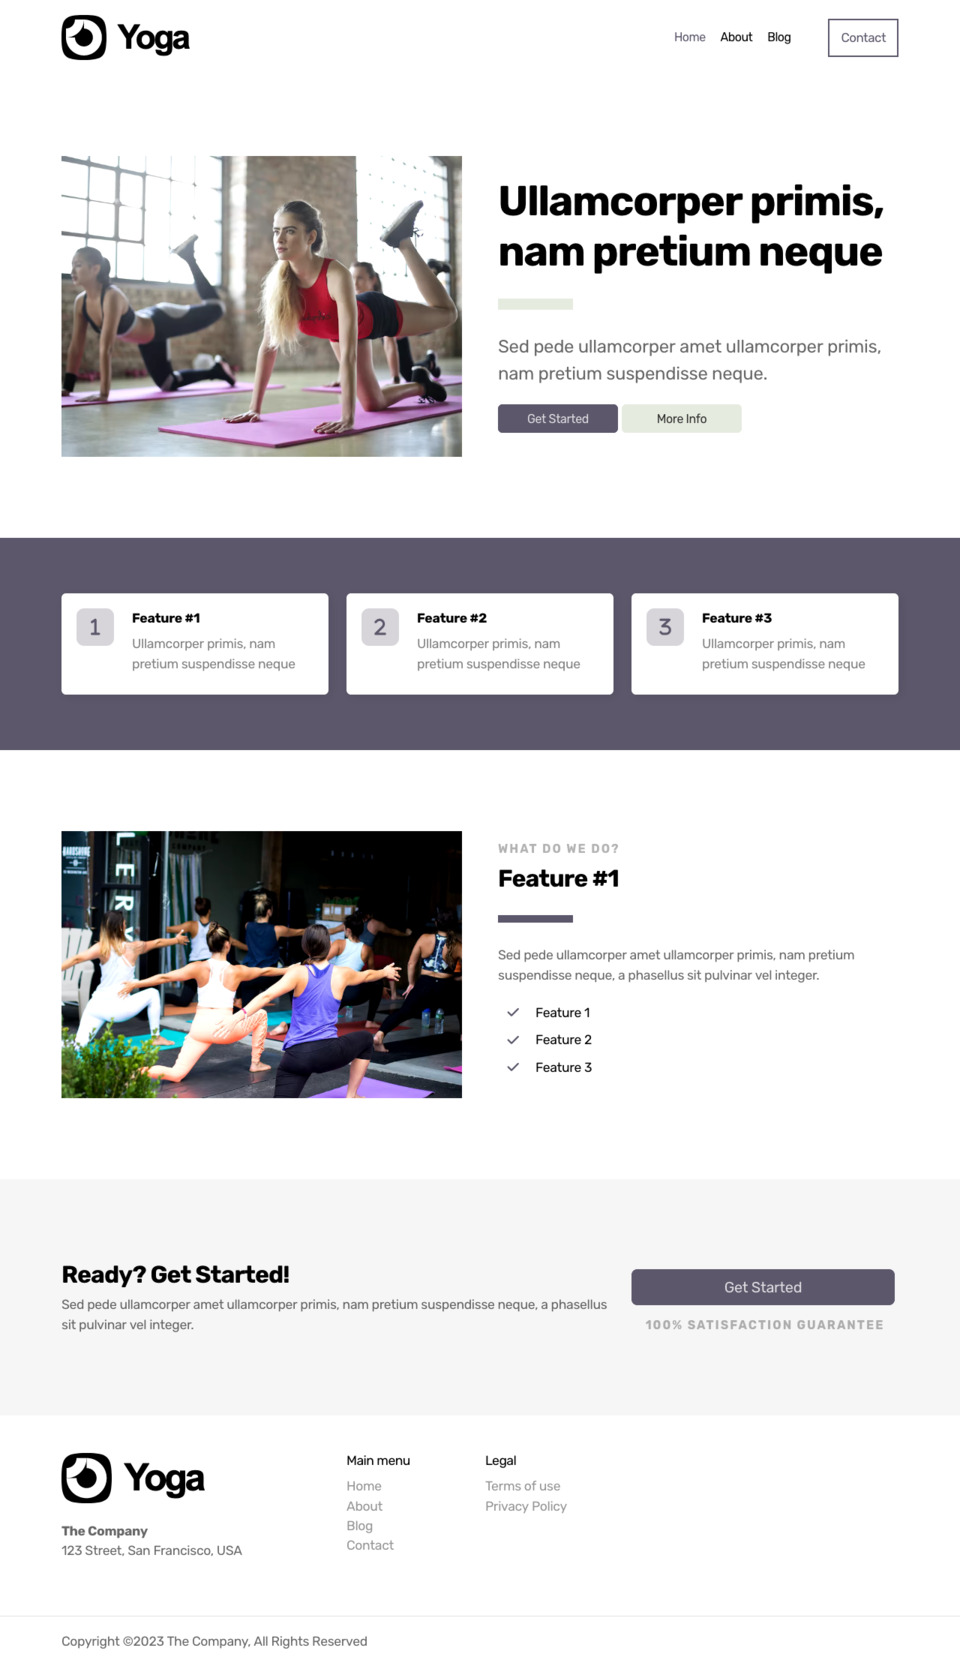 Yoga Website Template - Ideal for yoga classes, fitness centers, wellness blogs, personal trainers, and anyone in the health and wellness industry.